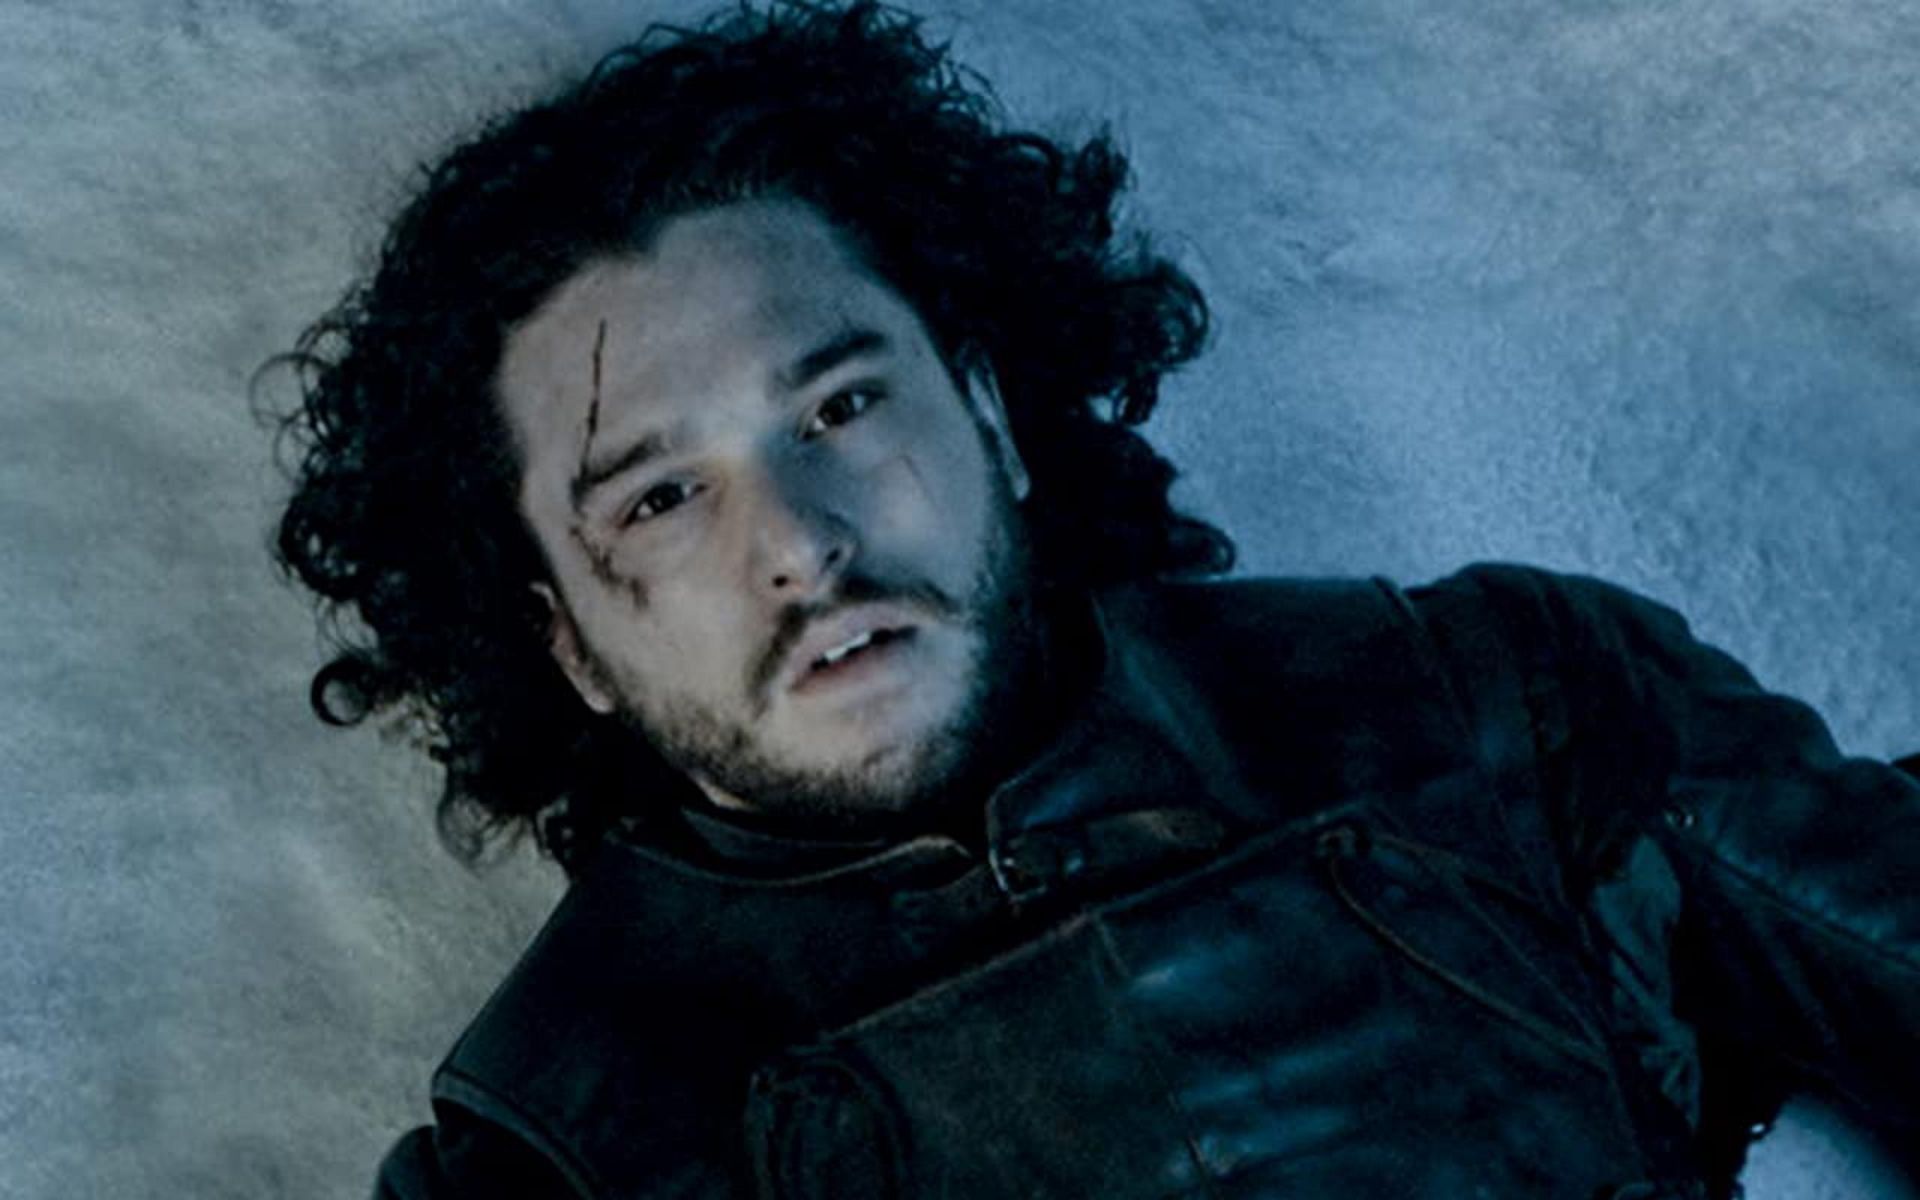 Kit Harington as the brooding Jon Snow in a still from Game of Thrones (Image via IMDb)